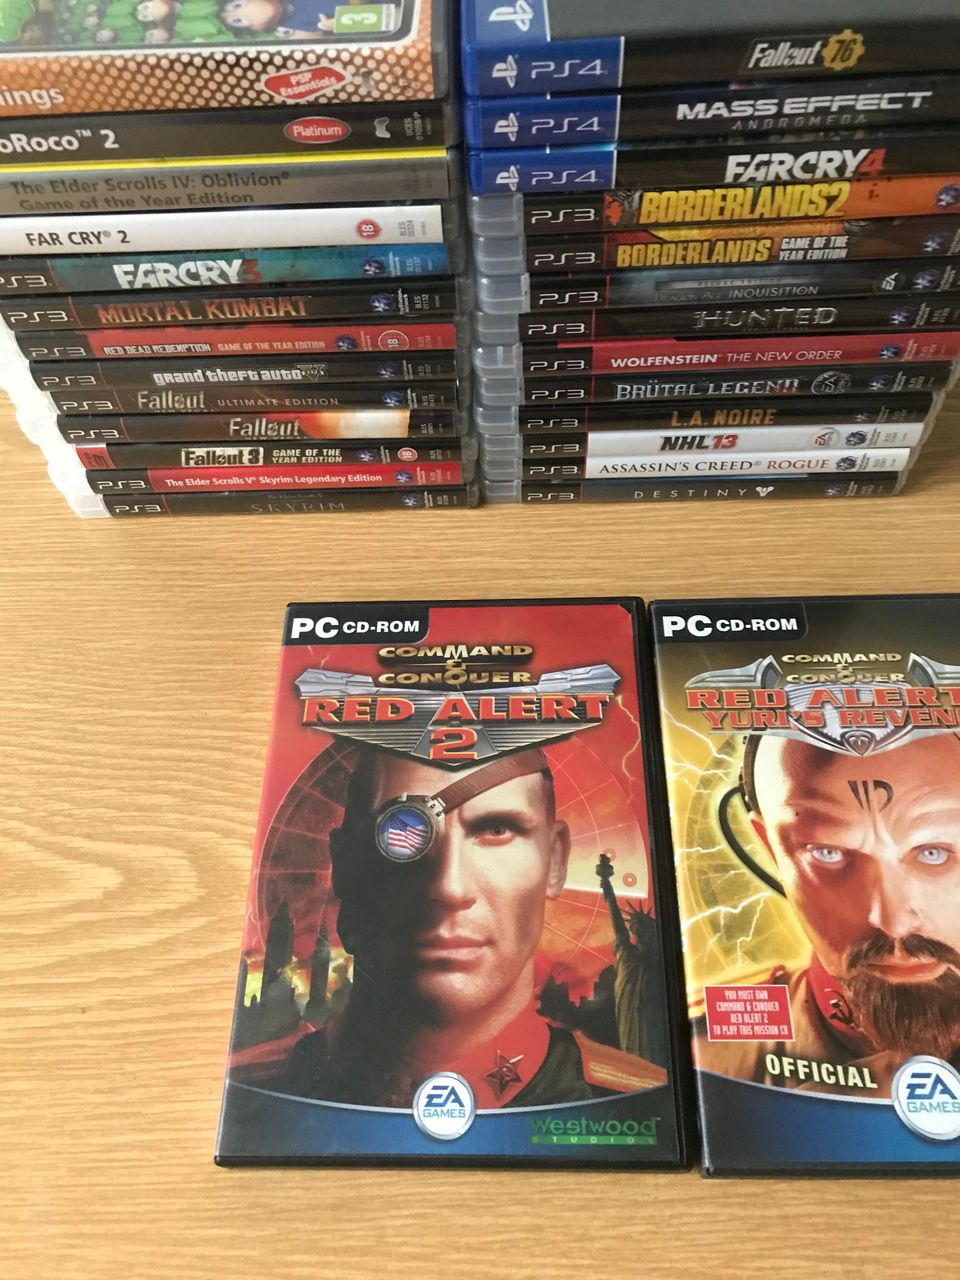 PC Command & Conquer: Red Alert 2